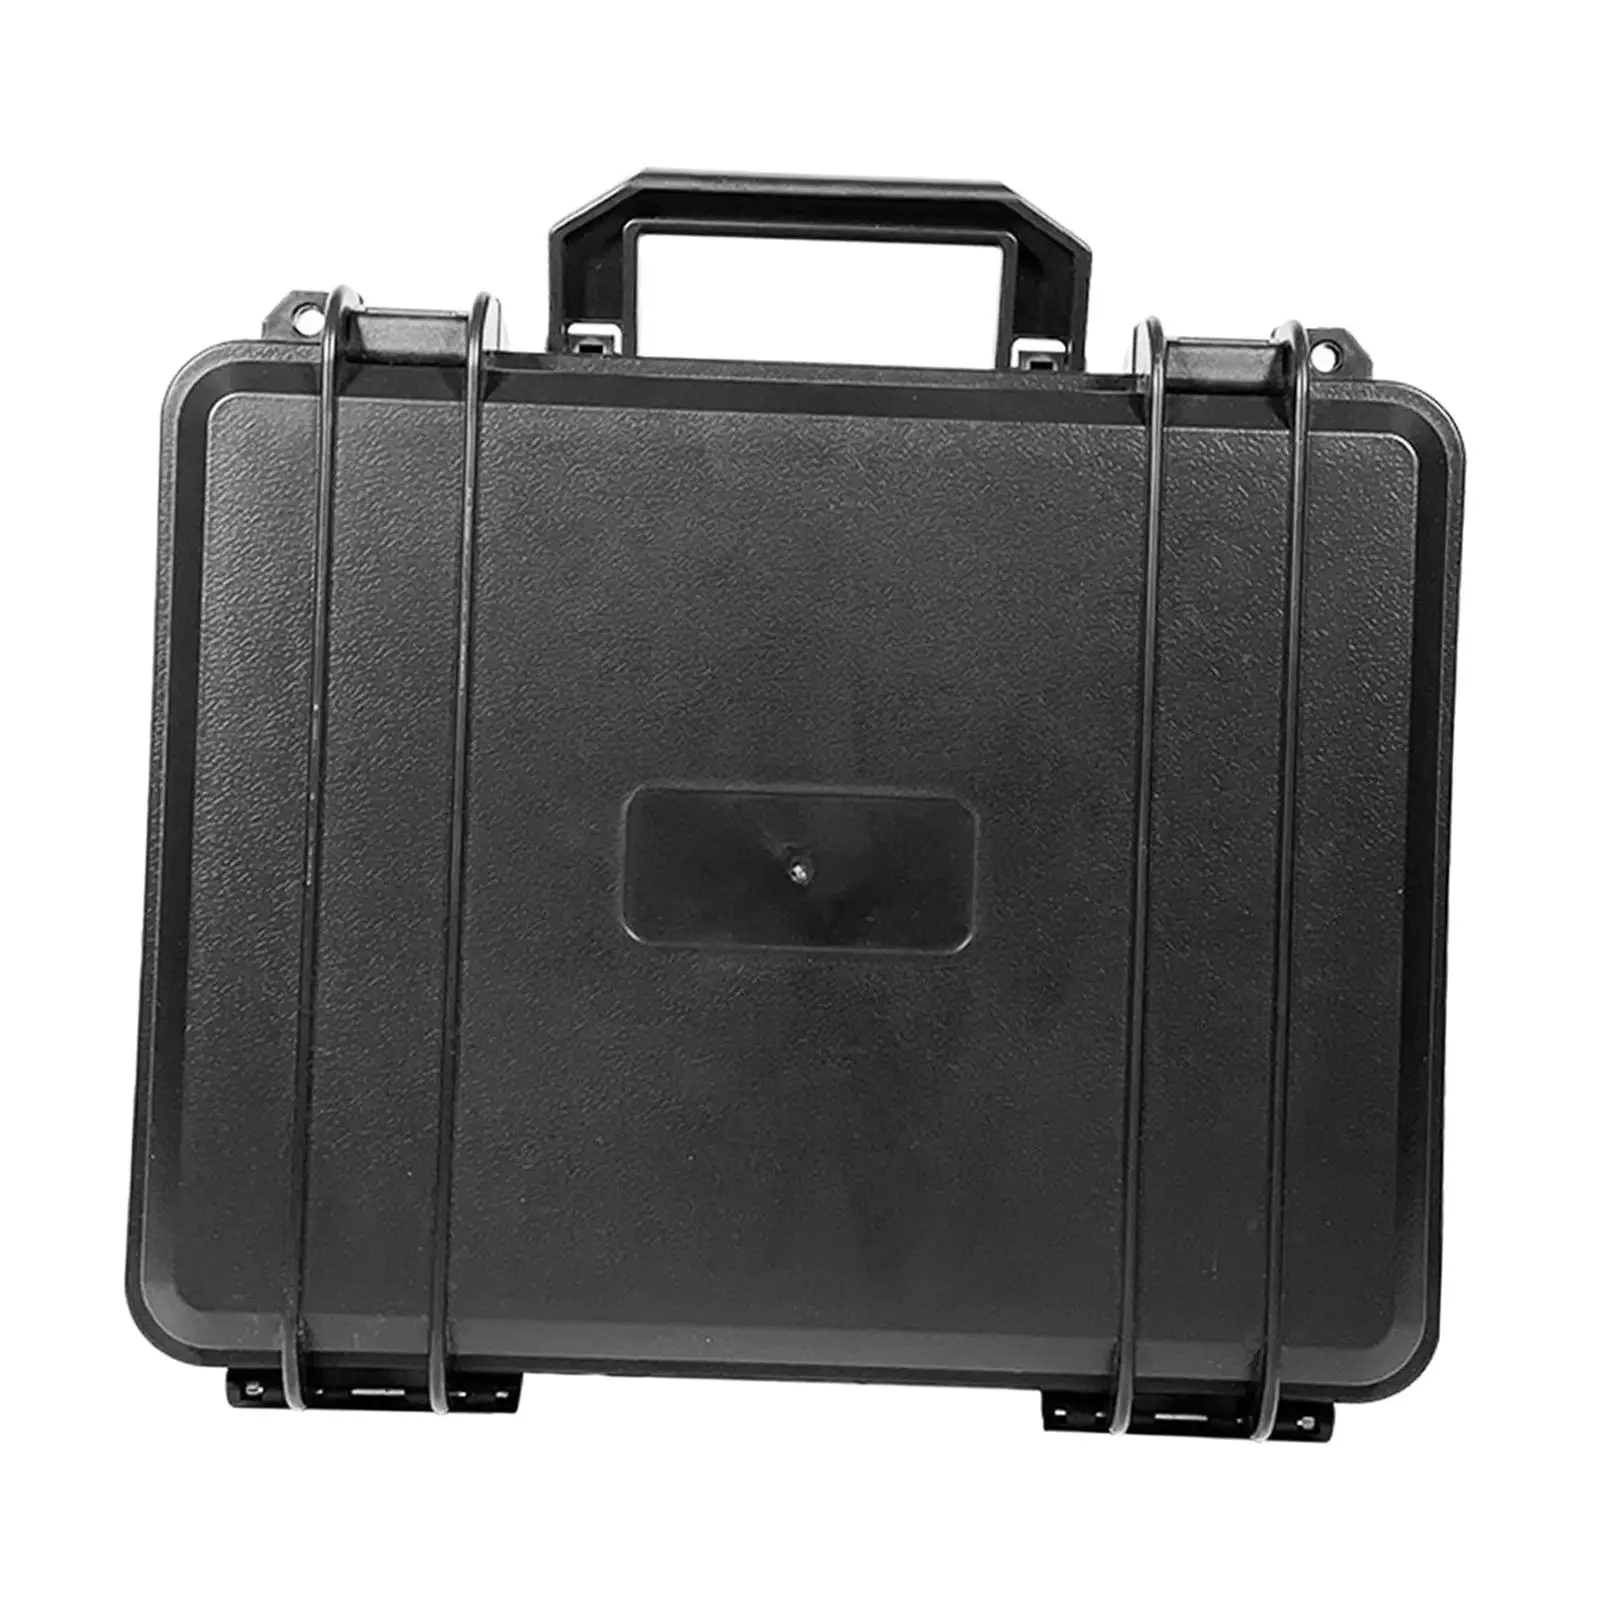 Universal Protective Instrument Tool Box Storage Case Waterproof Screws Carry Tools Box Lockable Durable Equipment for Outdoor